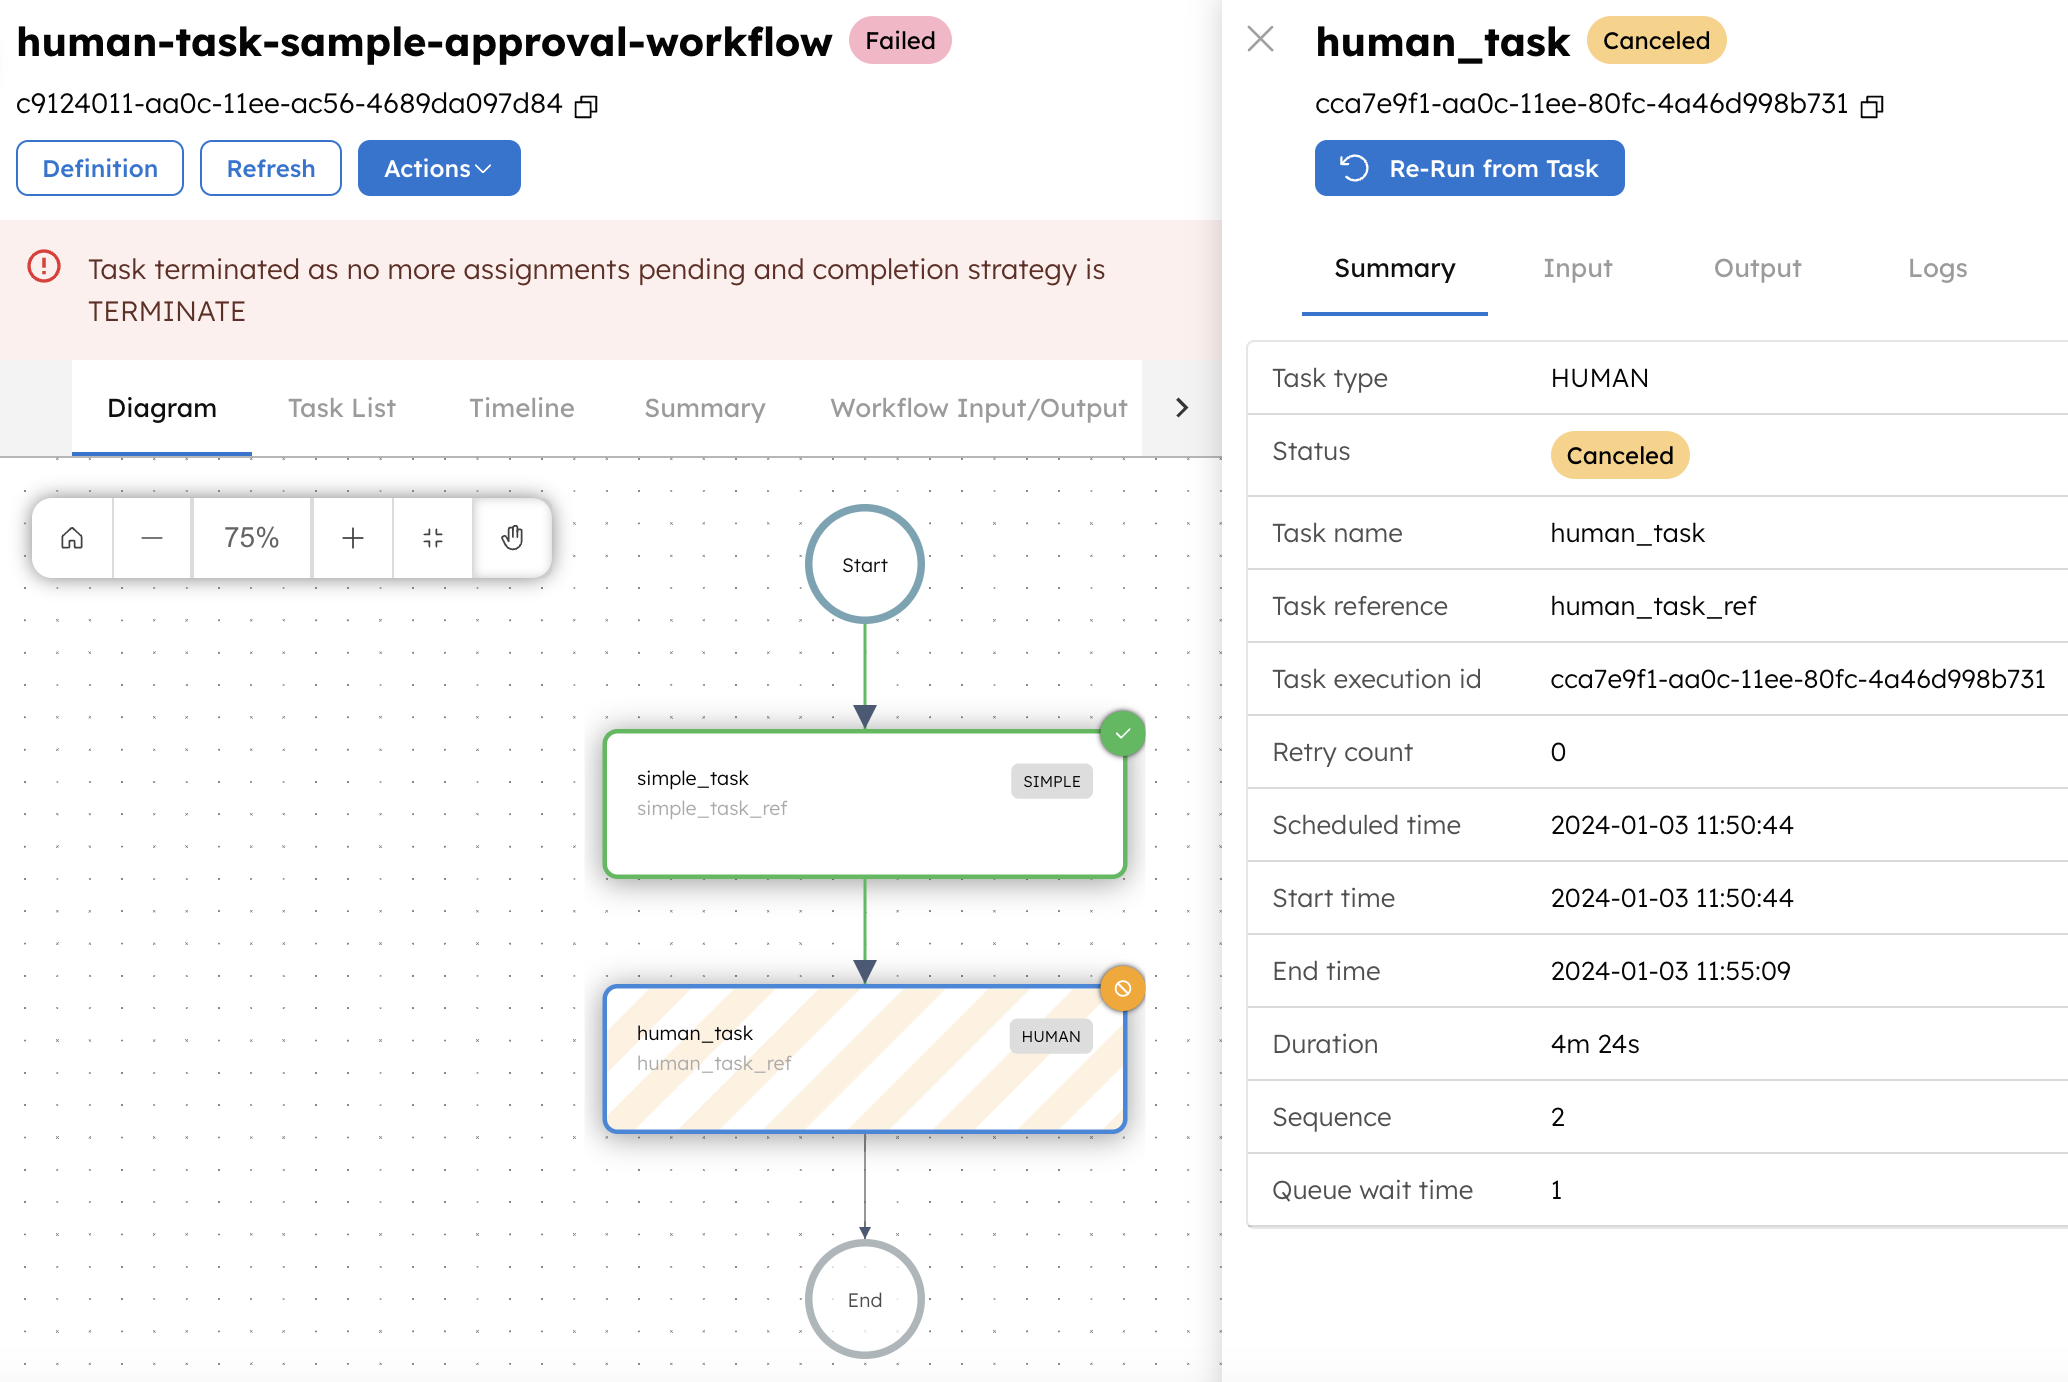 Workflow with human task failed on terminate action